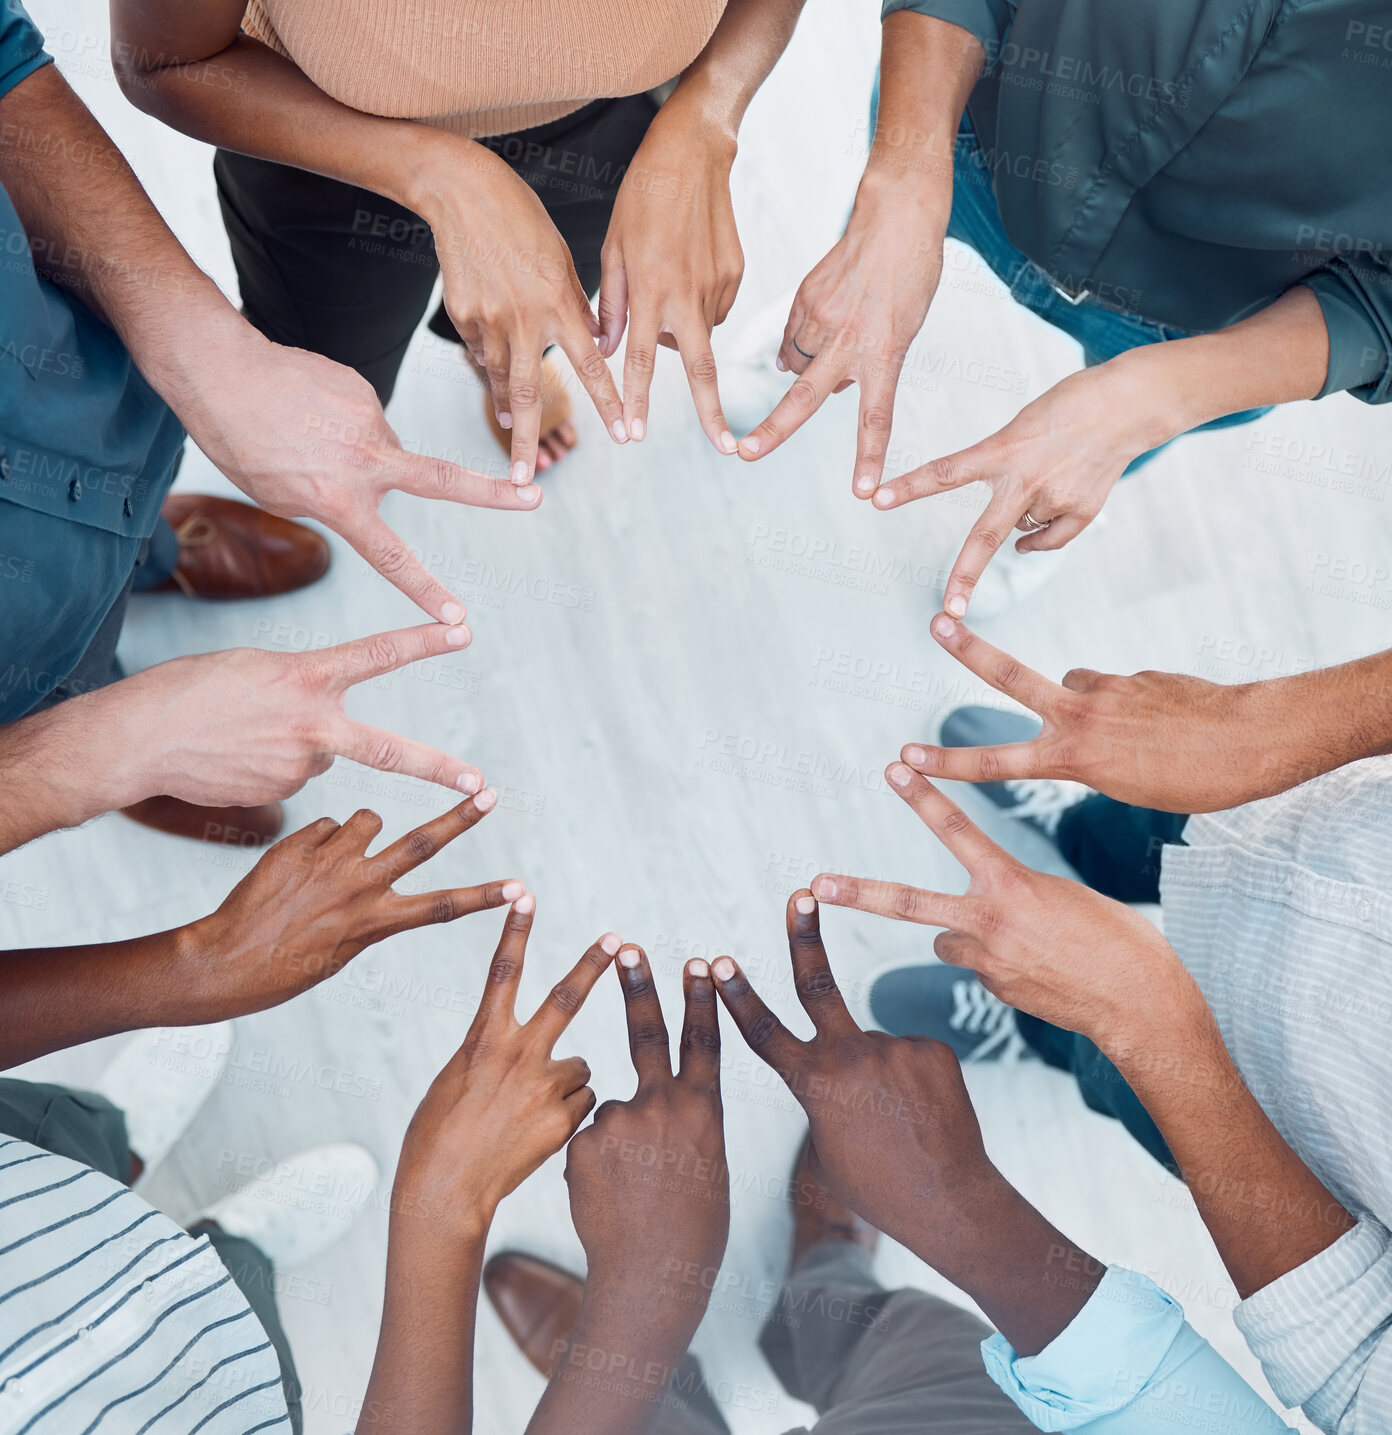 Buy stock photo Teamwork, peace hand sign together and corporate support of a worker team showing community. Business collaboration, solidarity and company trust gesture of staff workforce diversity ready to work